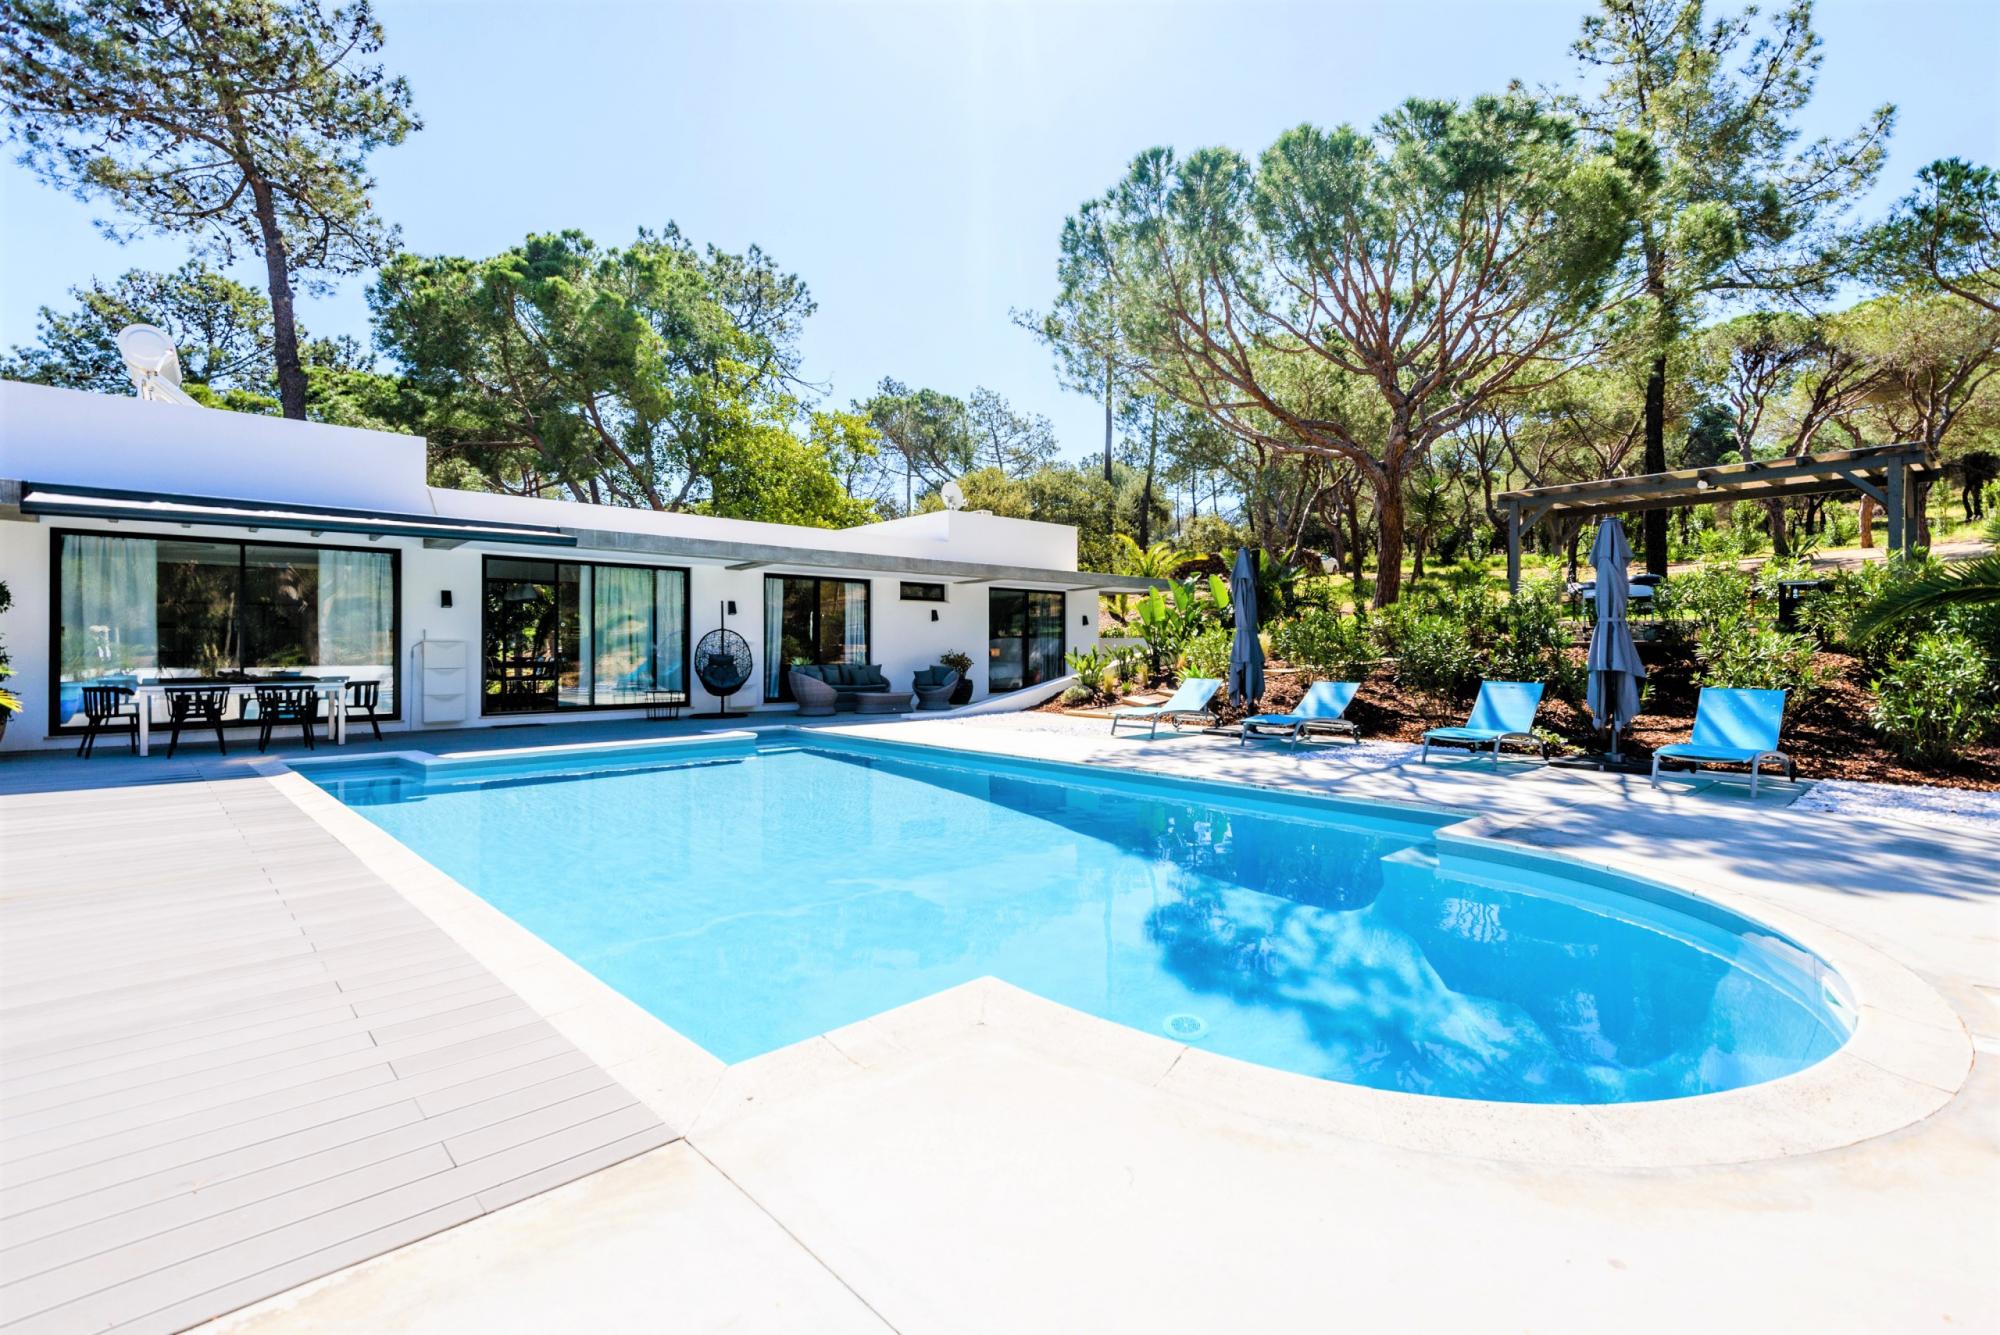 Property Image 2 - Mid Century Modern Villa with Great Pool and Grounds